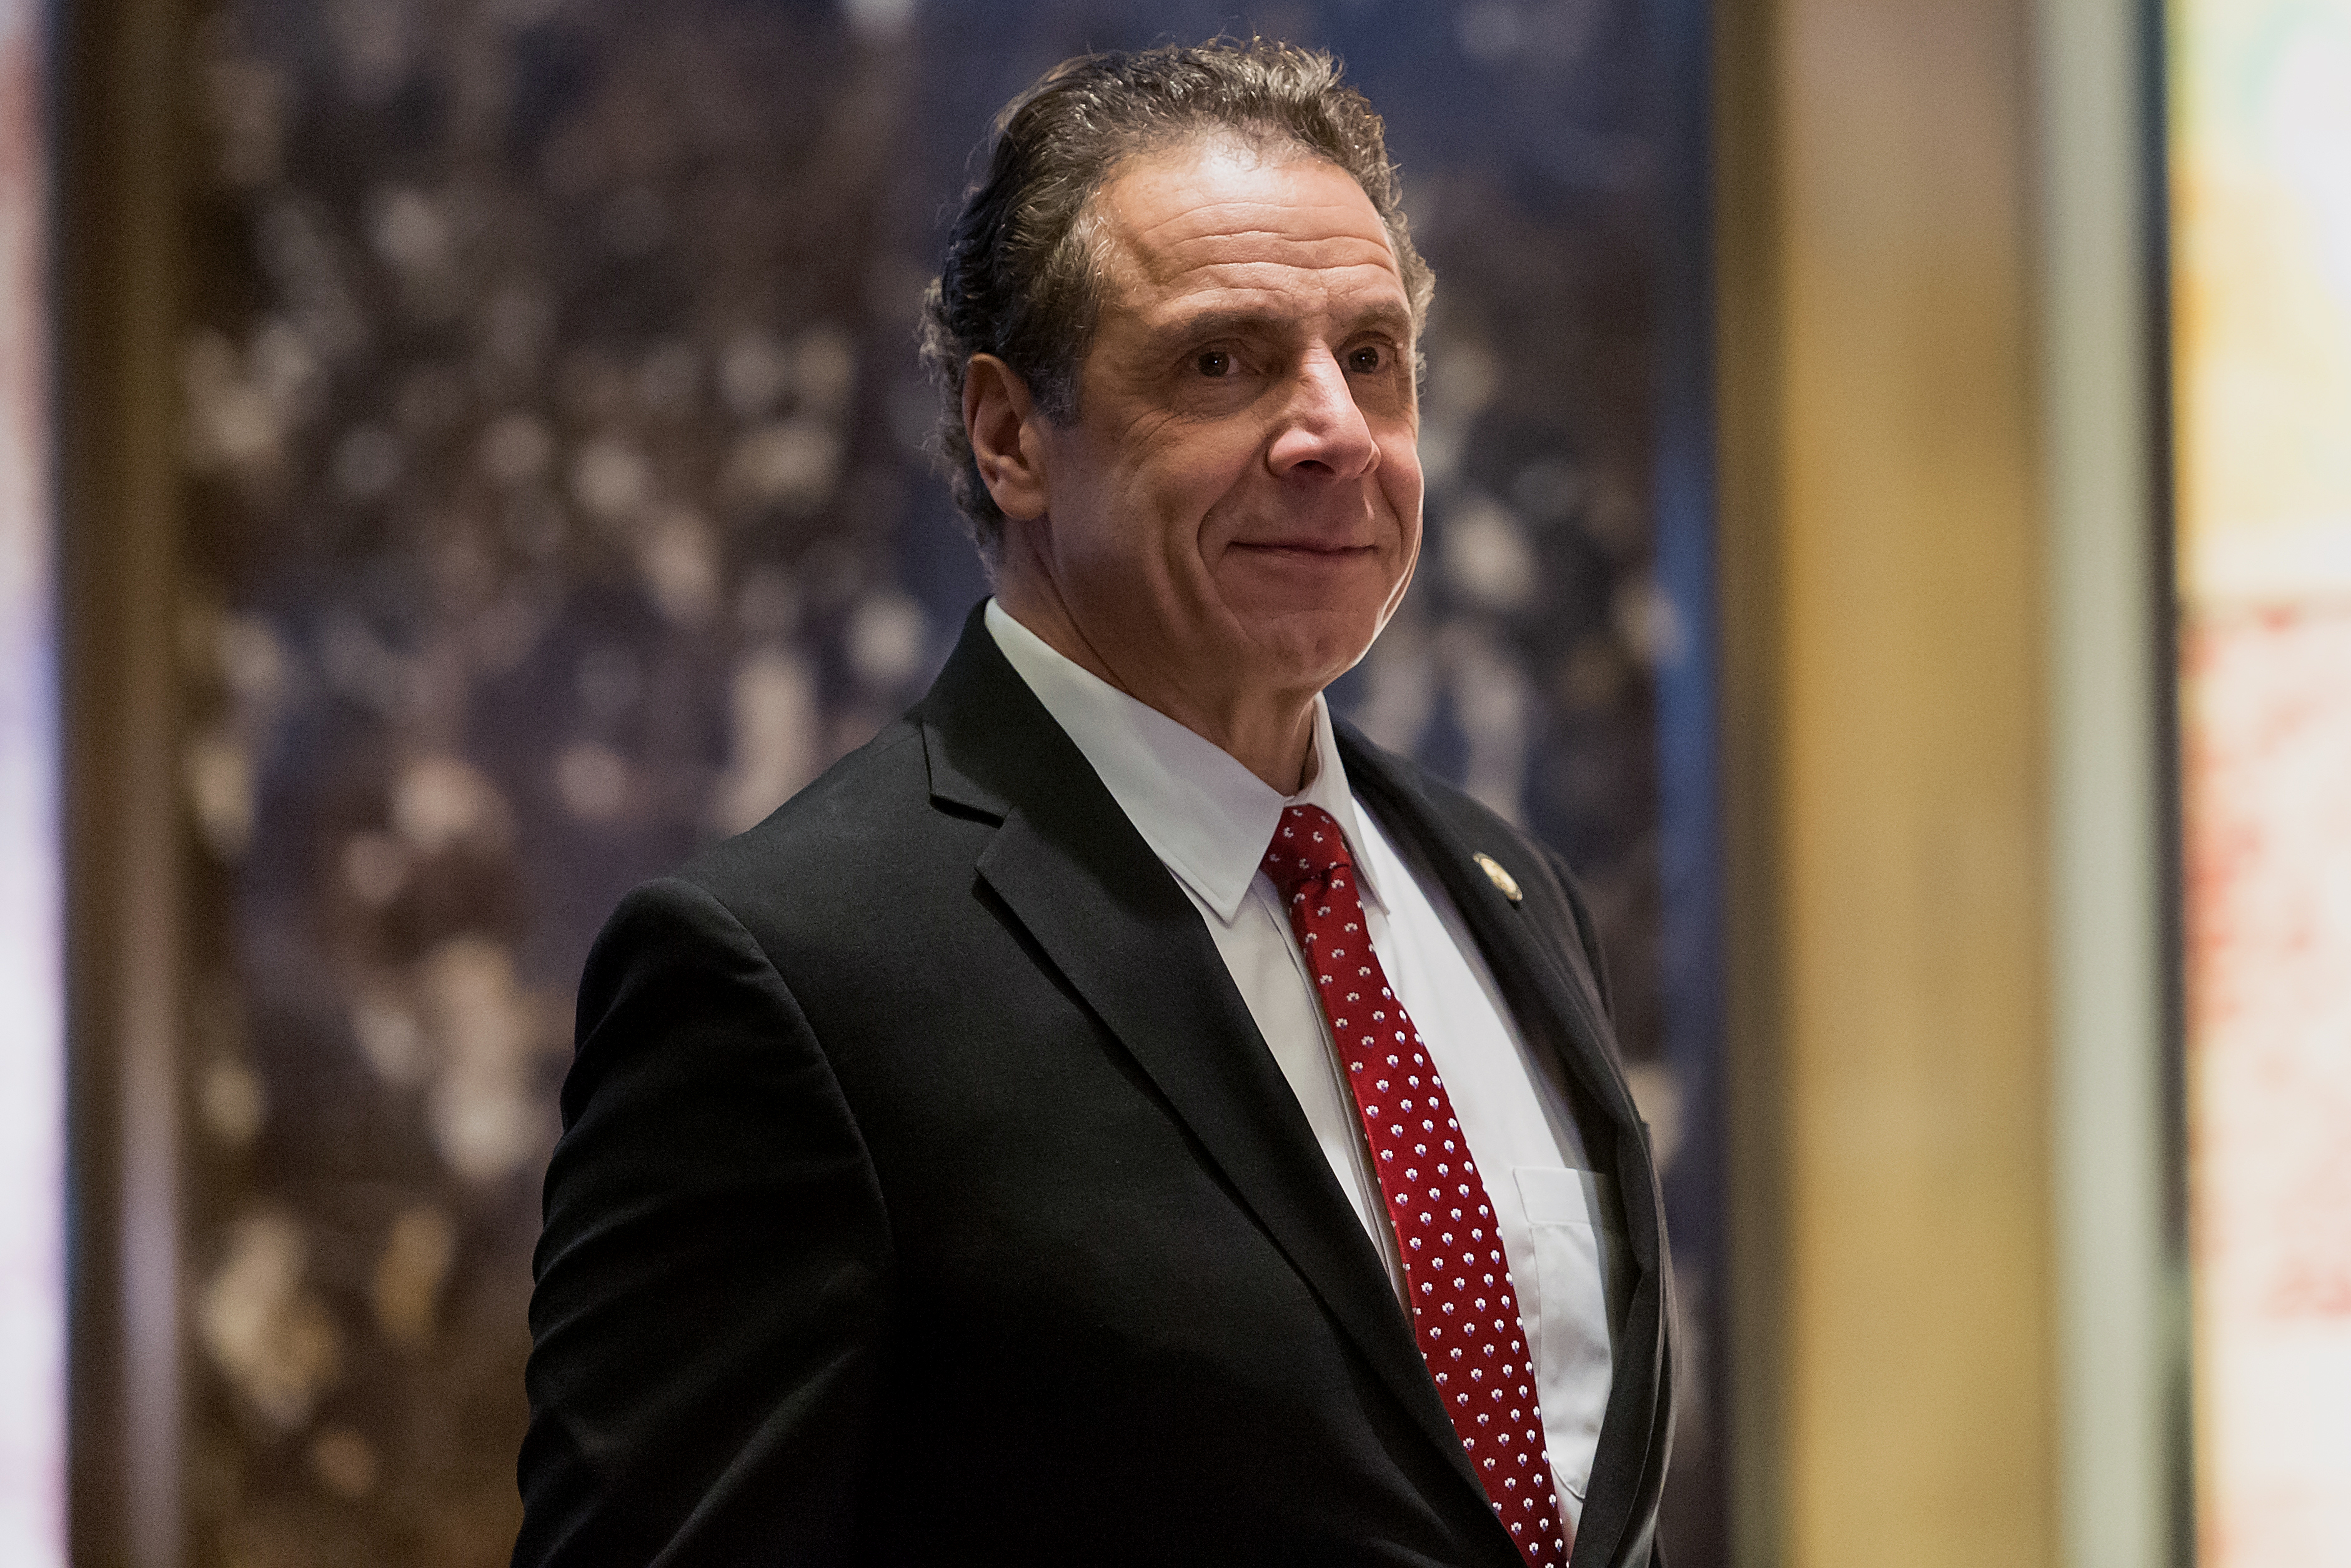 Andrew Cuomo, governor of New York, arrives in the lobby of Trump Tower in New York, on Jan. 18, 2017. (Bloomberg—Bloomberg/Getty Images)